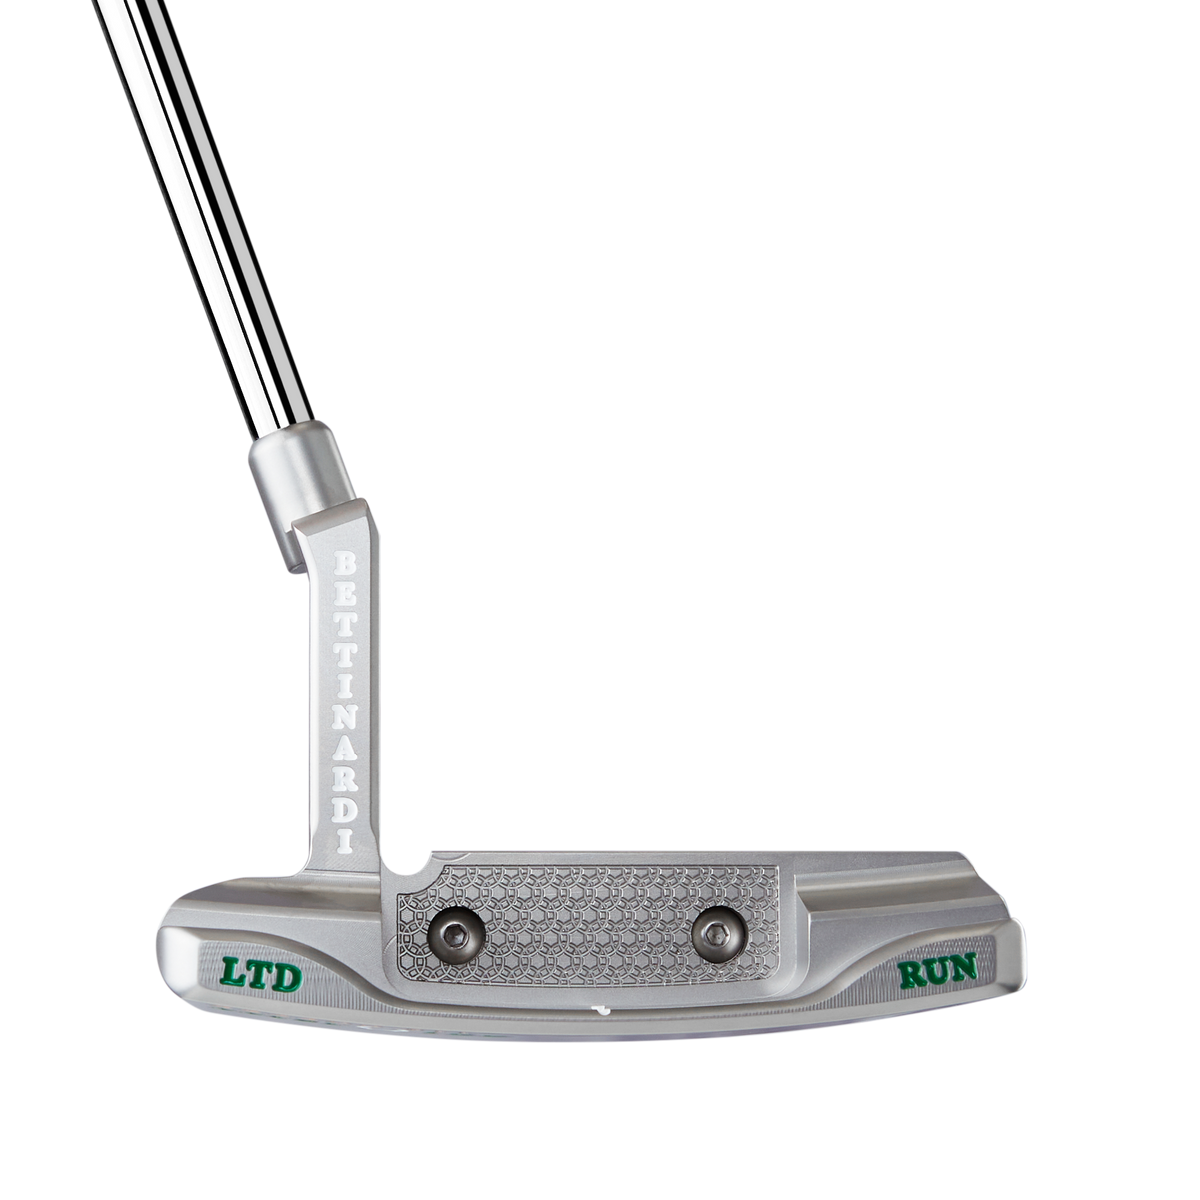 2022 SPRING CLASSIC LIMITED RUN BB1 PUTTER